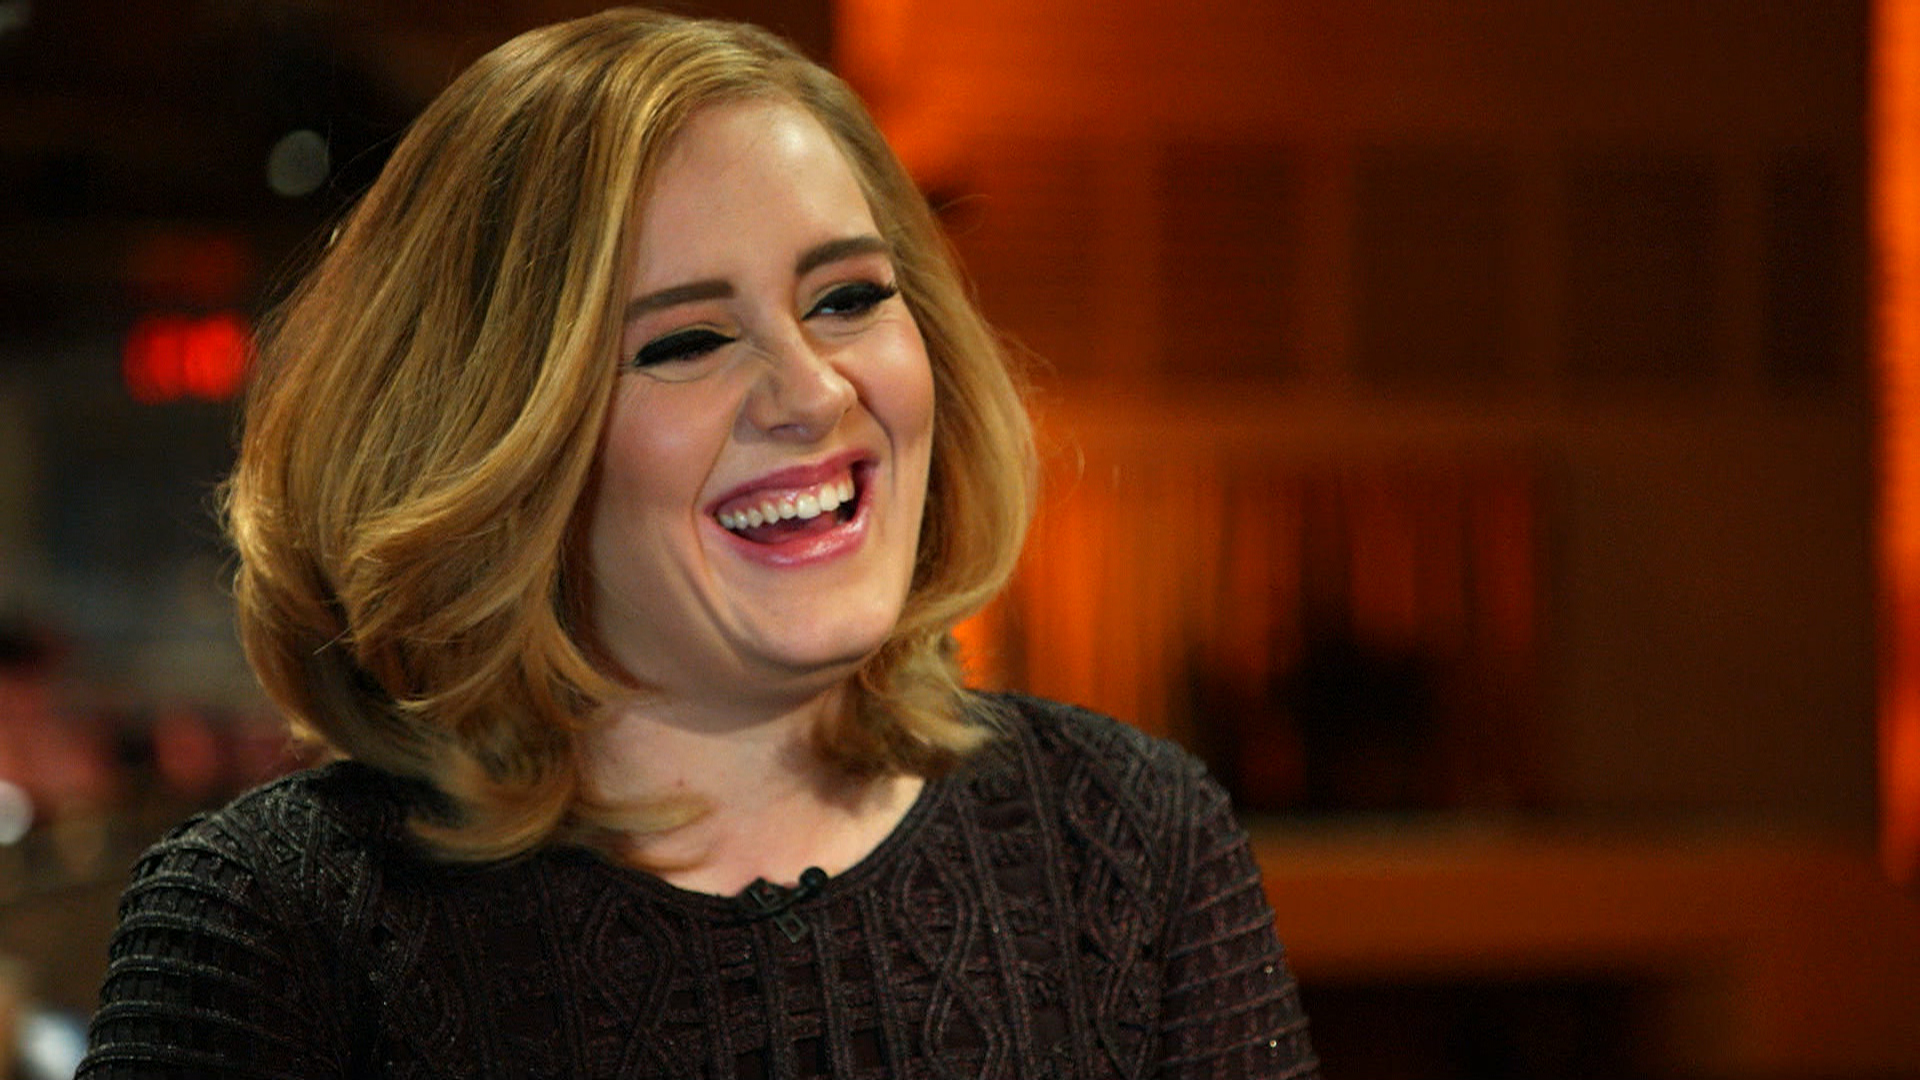 Adele debuts new haircut on the 'X Factor' UK